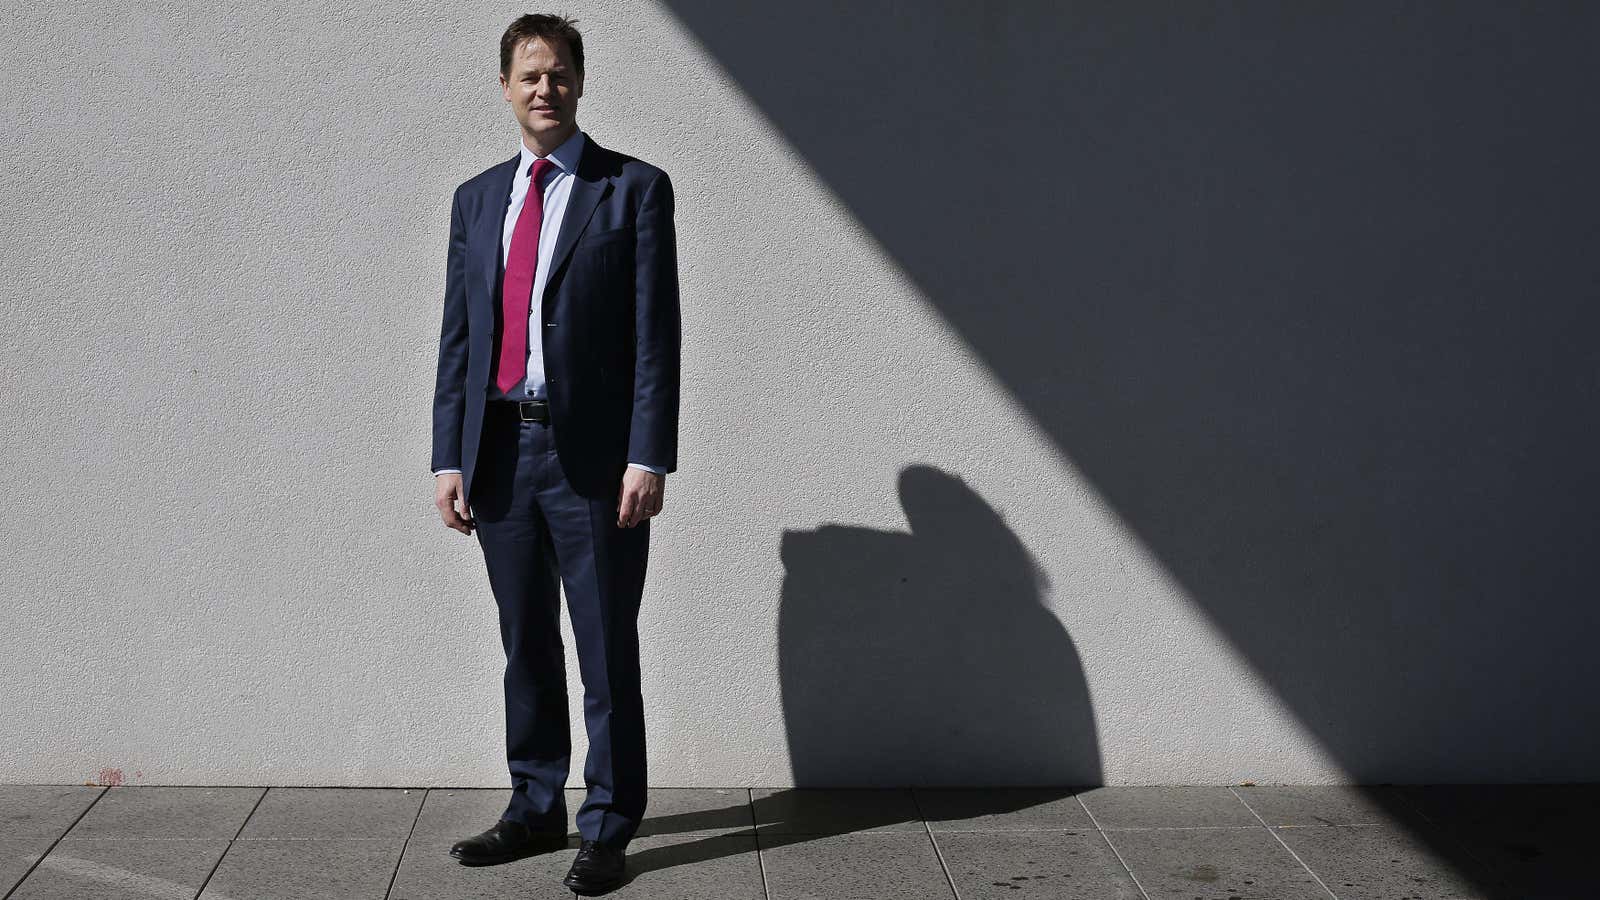 Clegg in his days as the UK’s deputy leader.